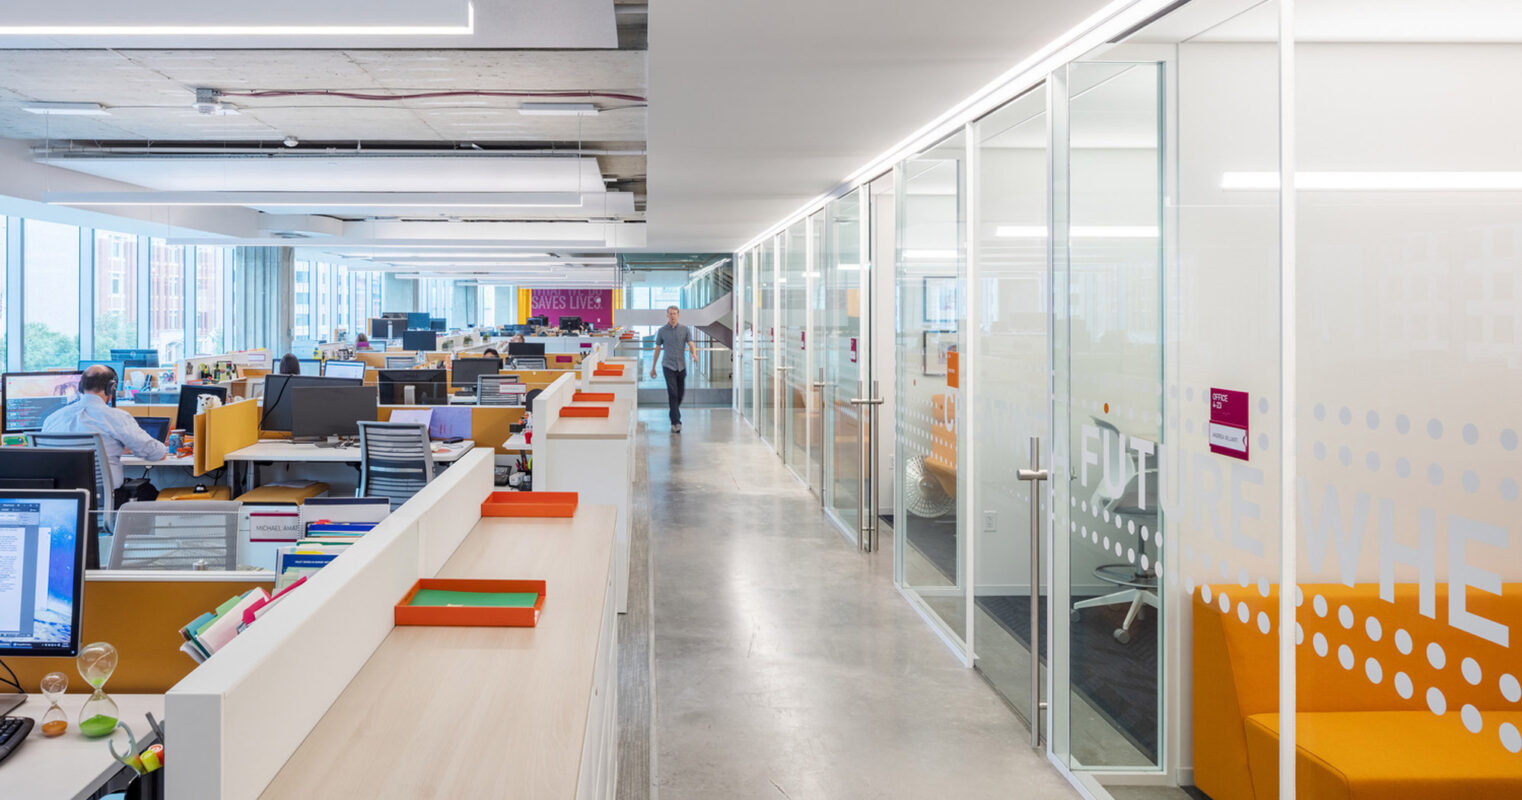 Open-plan office space showing a clear distinction between collaborative areas with clusters of desks and private glass-walled meeting rooms, featuring bright pops of color and ergonomic furniture. Natural light fills the space, complementing the contemporary and functional design.